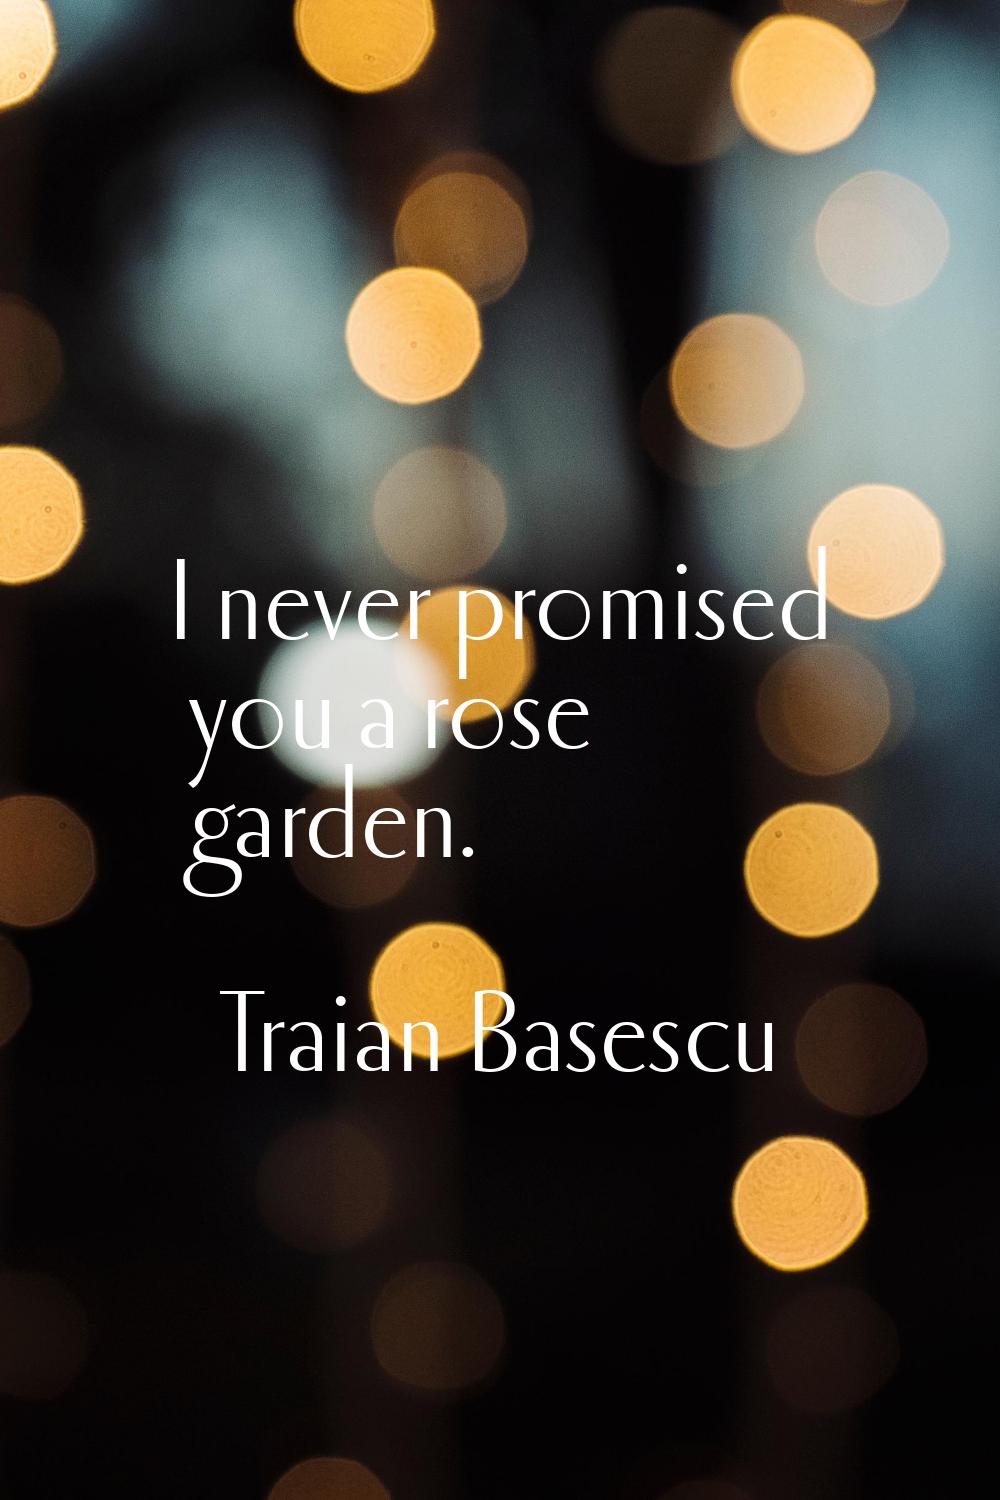 I never promised you a rose garden.